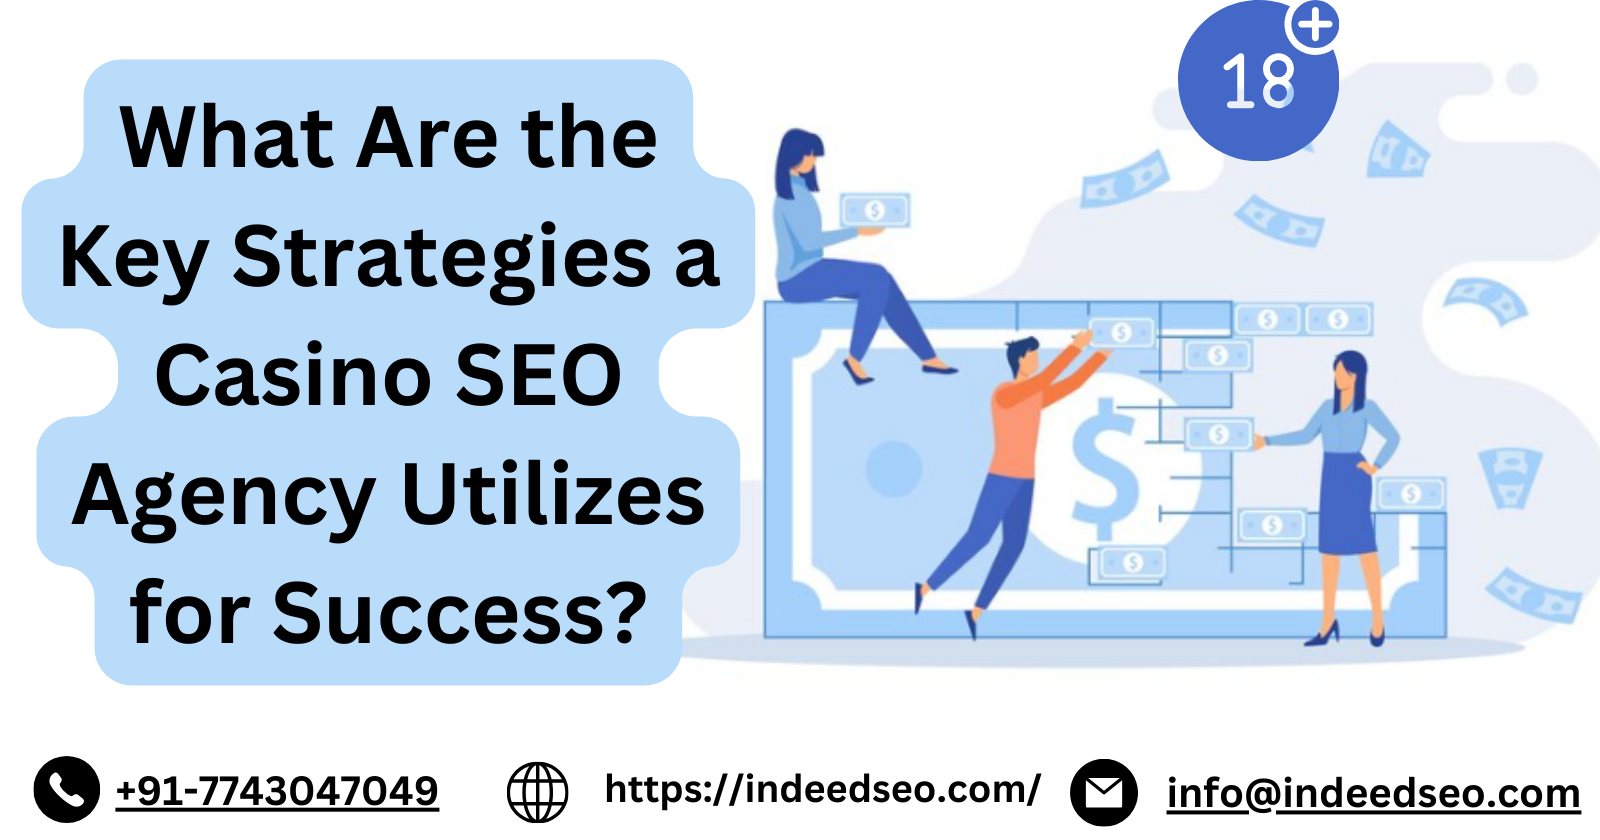 What Are the Key Strategies a Casino SEO Agency Utilizes for Success?